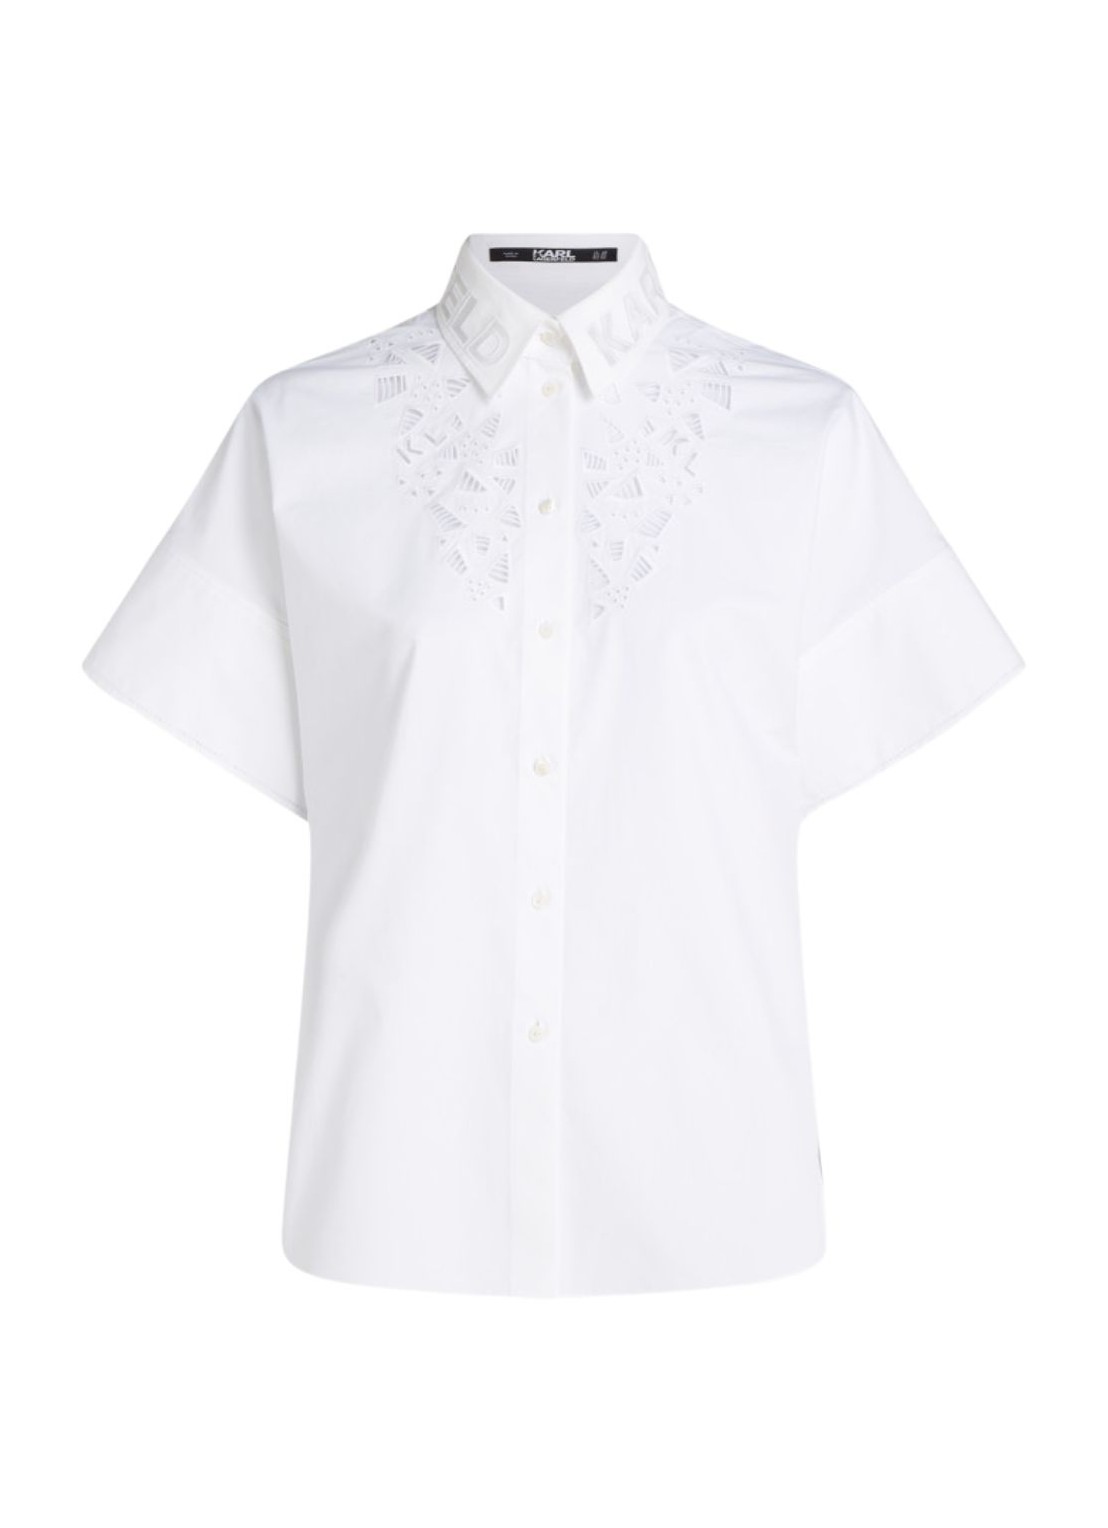 Camiseria karl lagerfeld shirt womanss embroidered shirt - 241w1606 100 talla 38
 